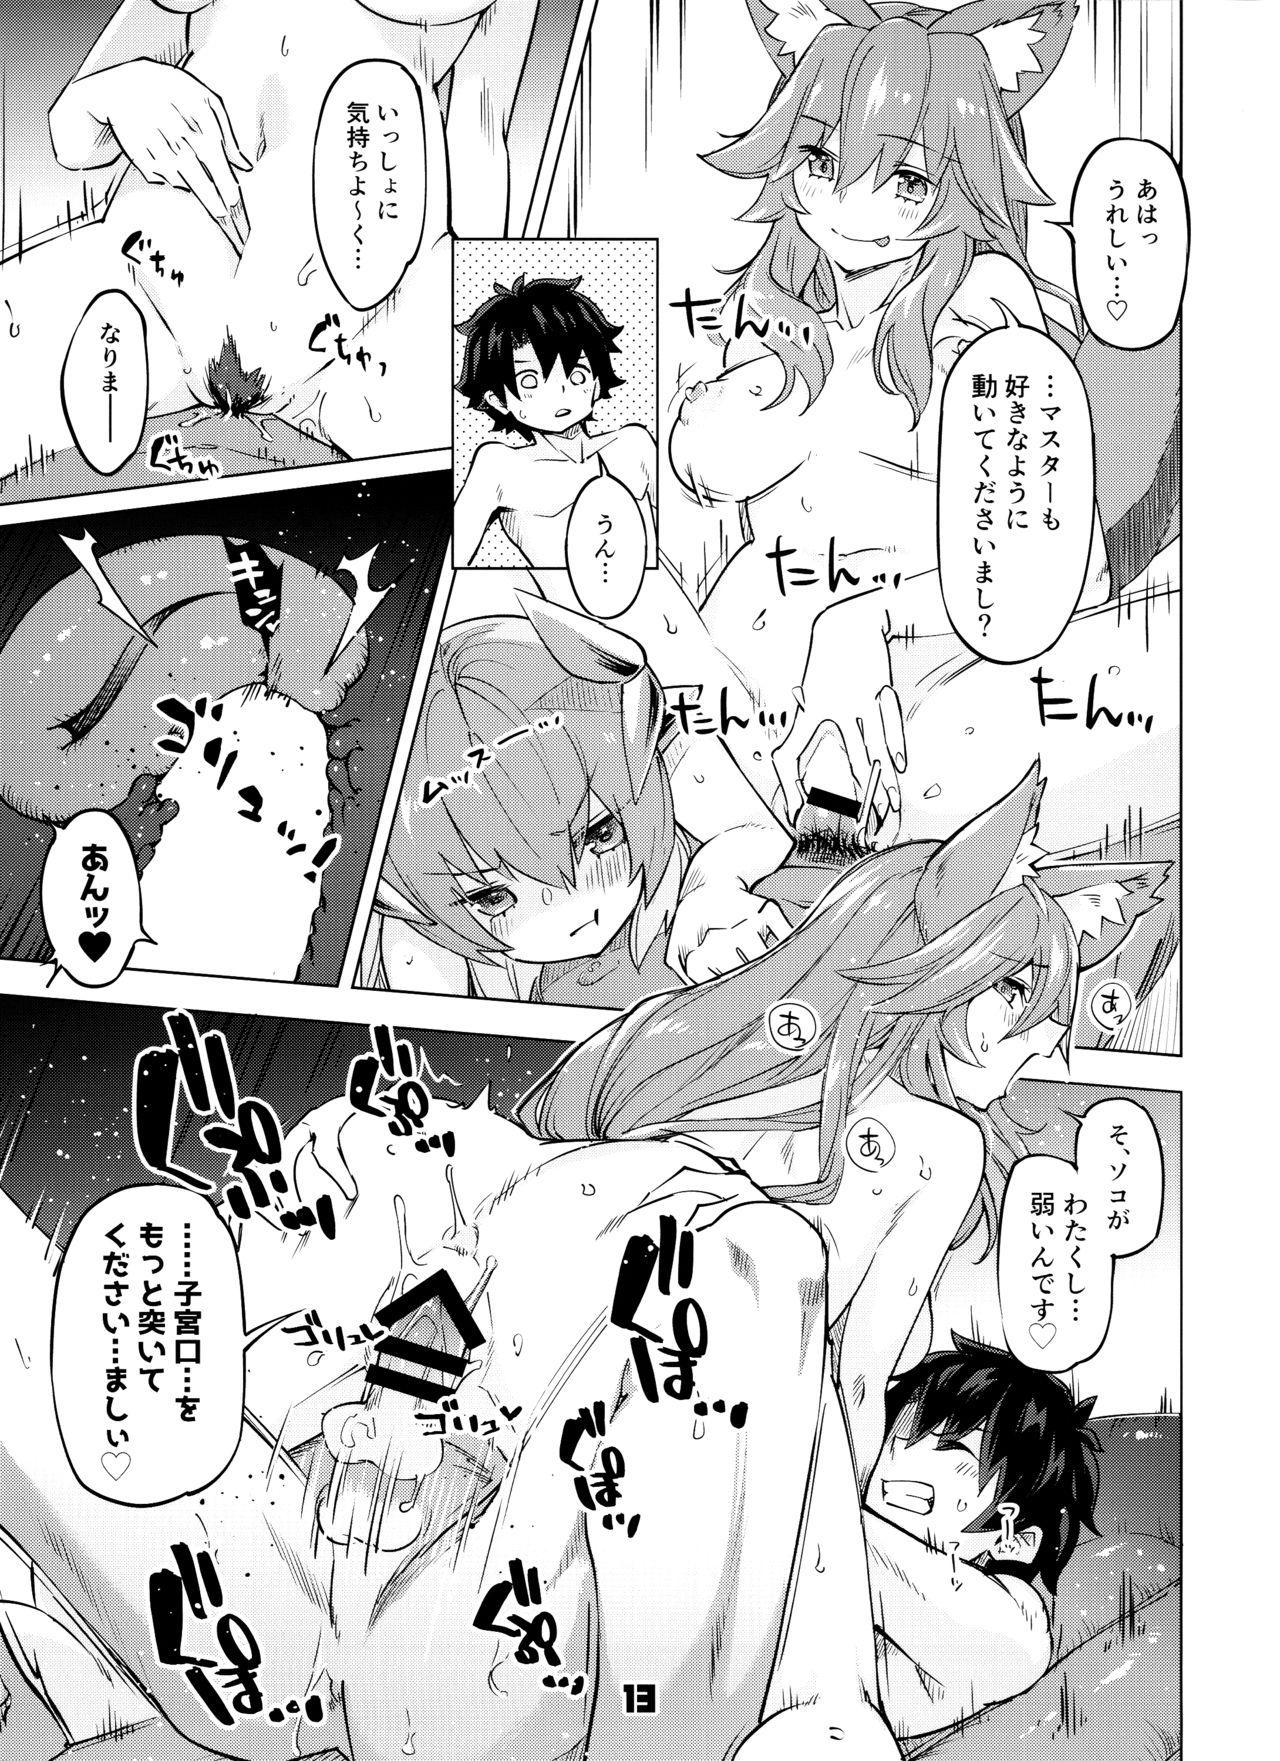 Ikillitts Sex Shinai to Derarenai My Room 2 - My room can not go out - Fate grand order Straight Porn - Page 12